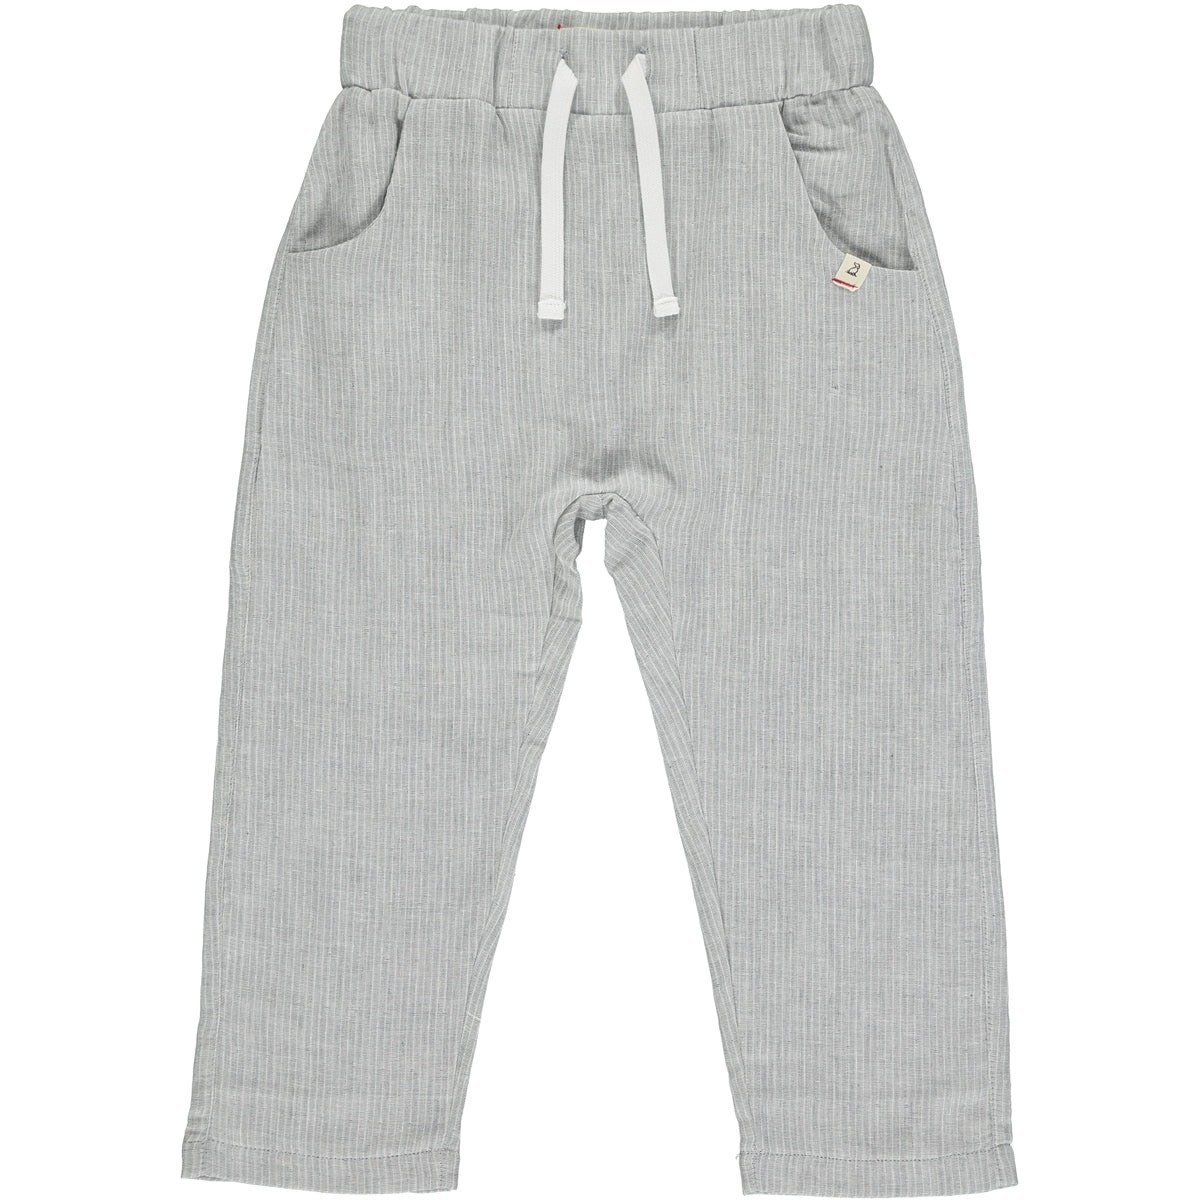 Bosun Gauze Pants, Grey Stripe - Vancouver's Best Baby & Kids Store: Unique  Gifts, Toys, Clothing, Shoes, Boots, Baby Shower Gifts.